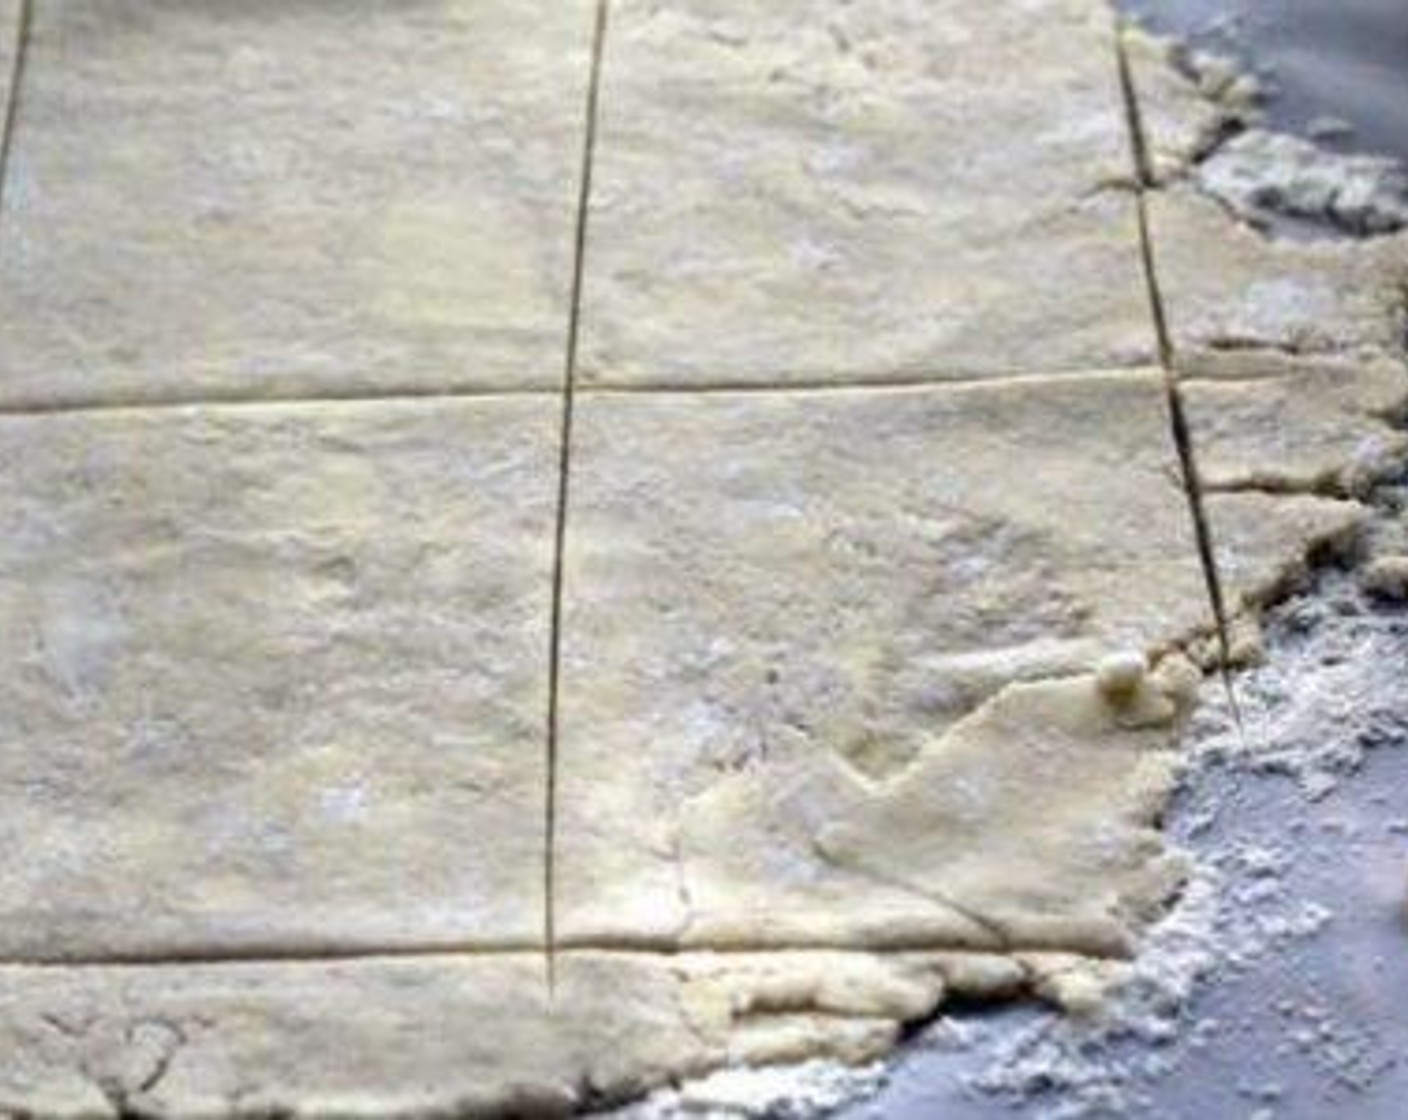 step 5 On a lightly floured surface, roll the prepared cornmeal crust until thin like you would use for a traditional pie. Cut into even rectangles.